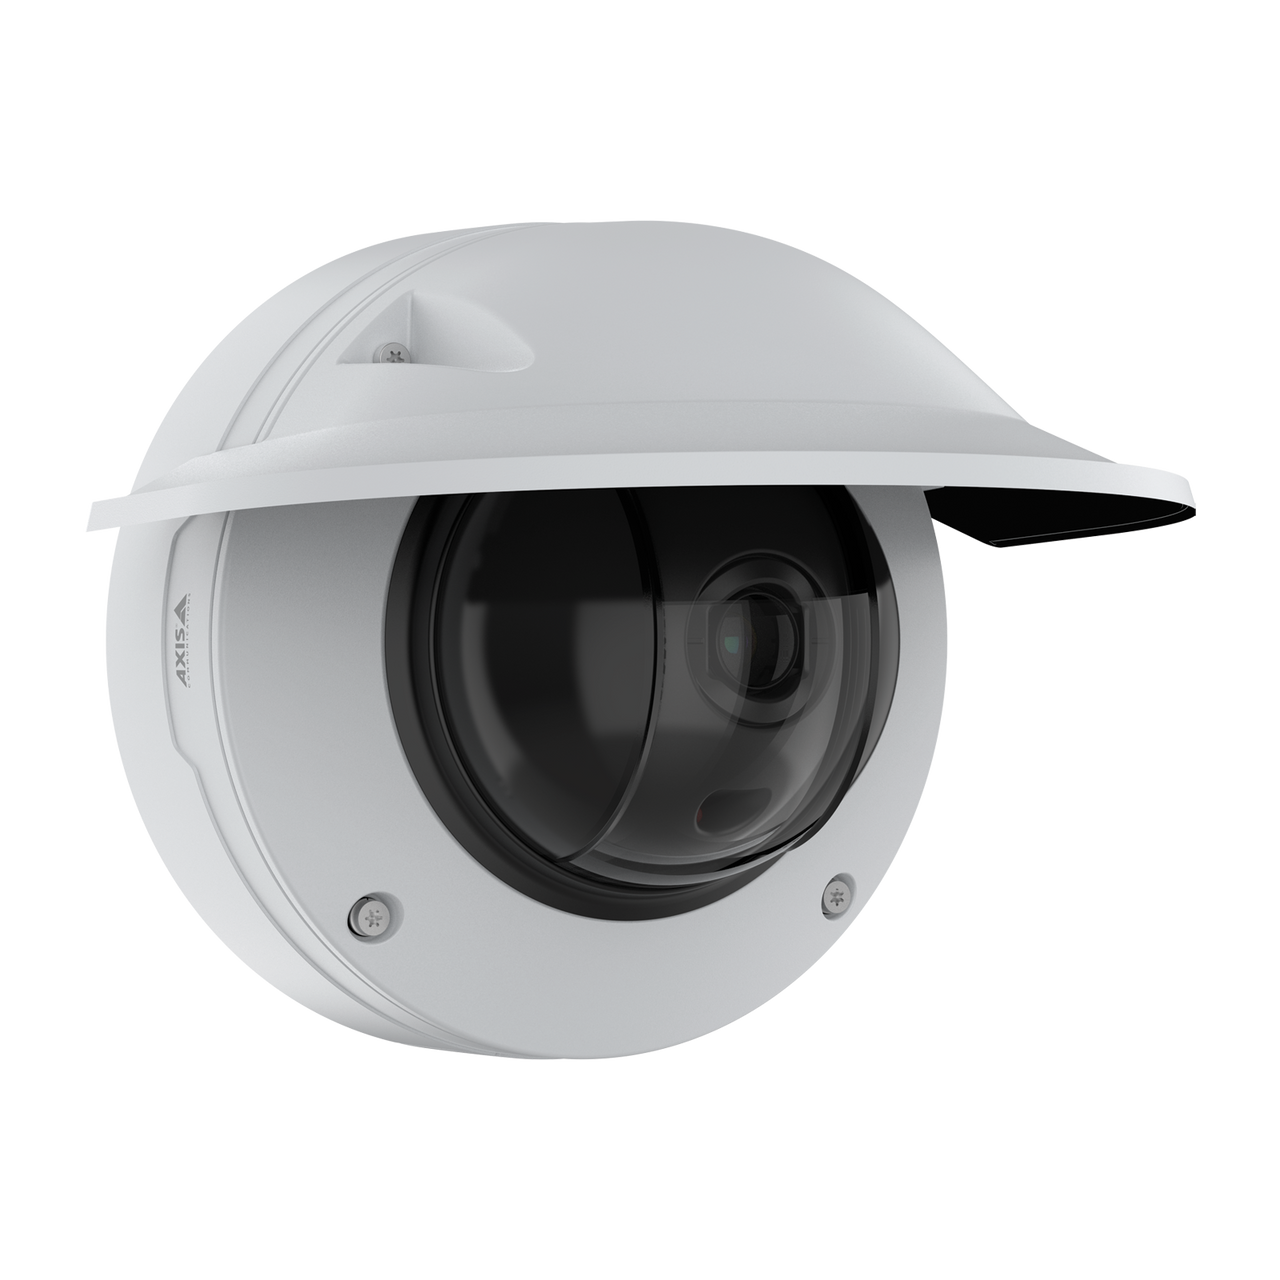 AXIS Q3536-LVE 29MM DOME CAMERA Advanced dome with deep learning and 4 MP